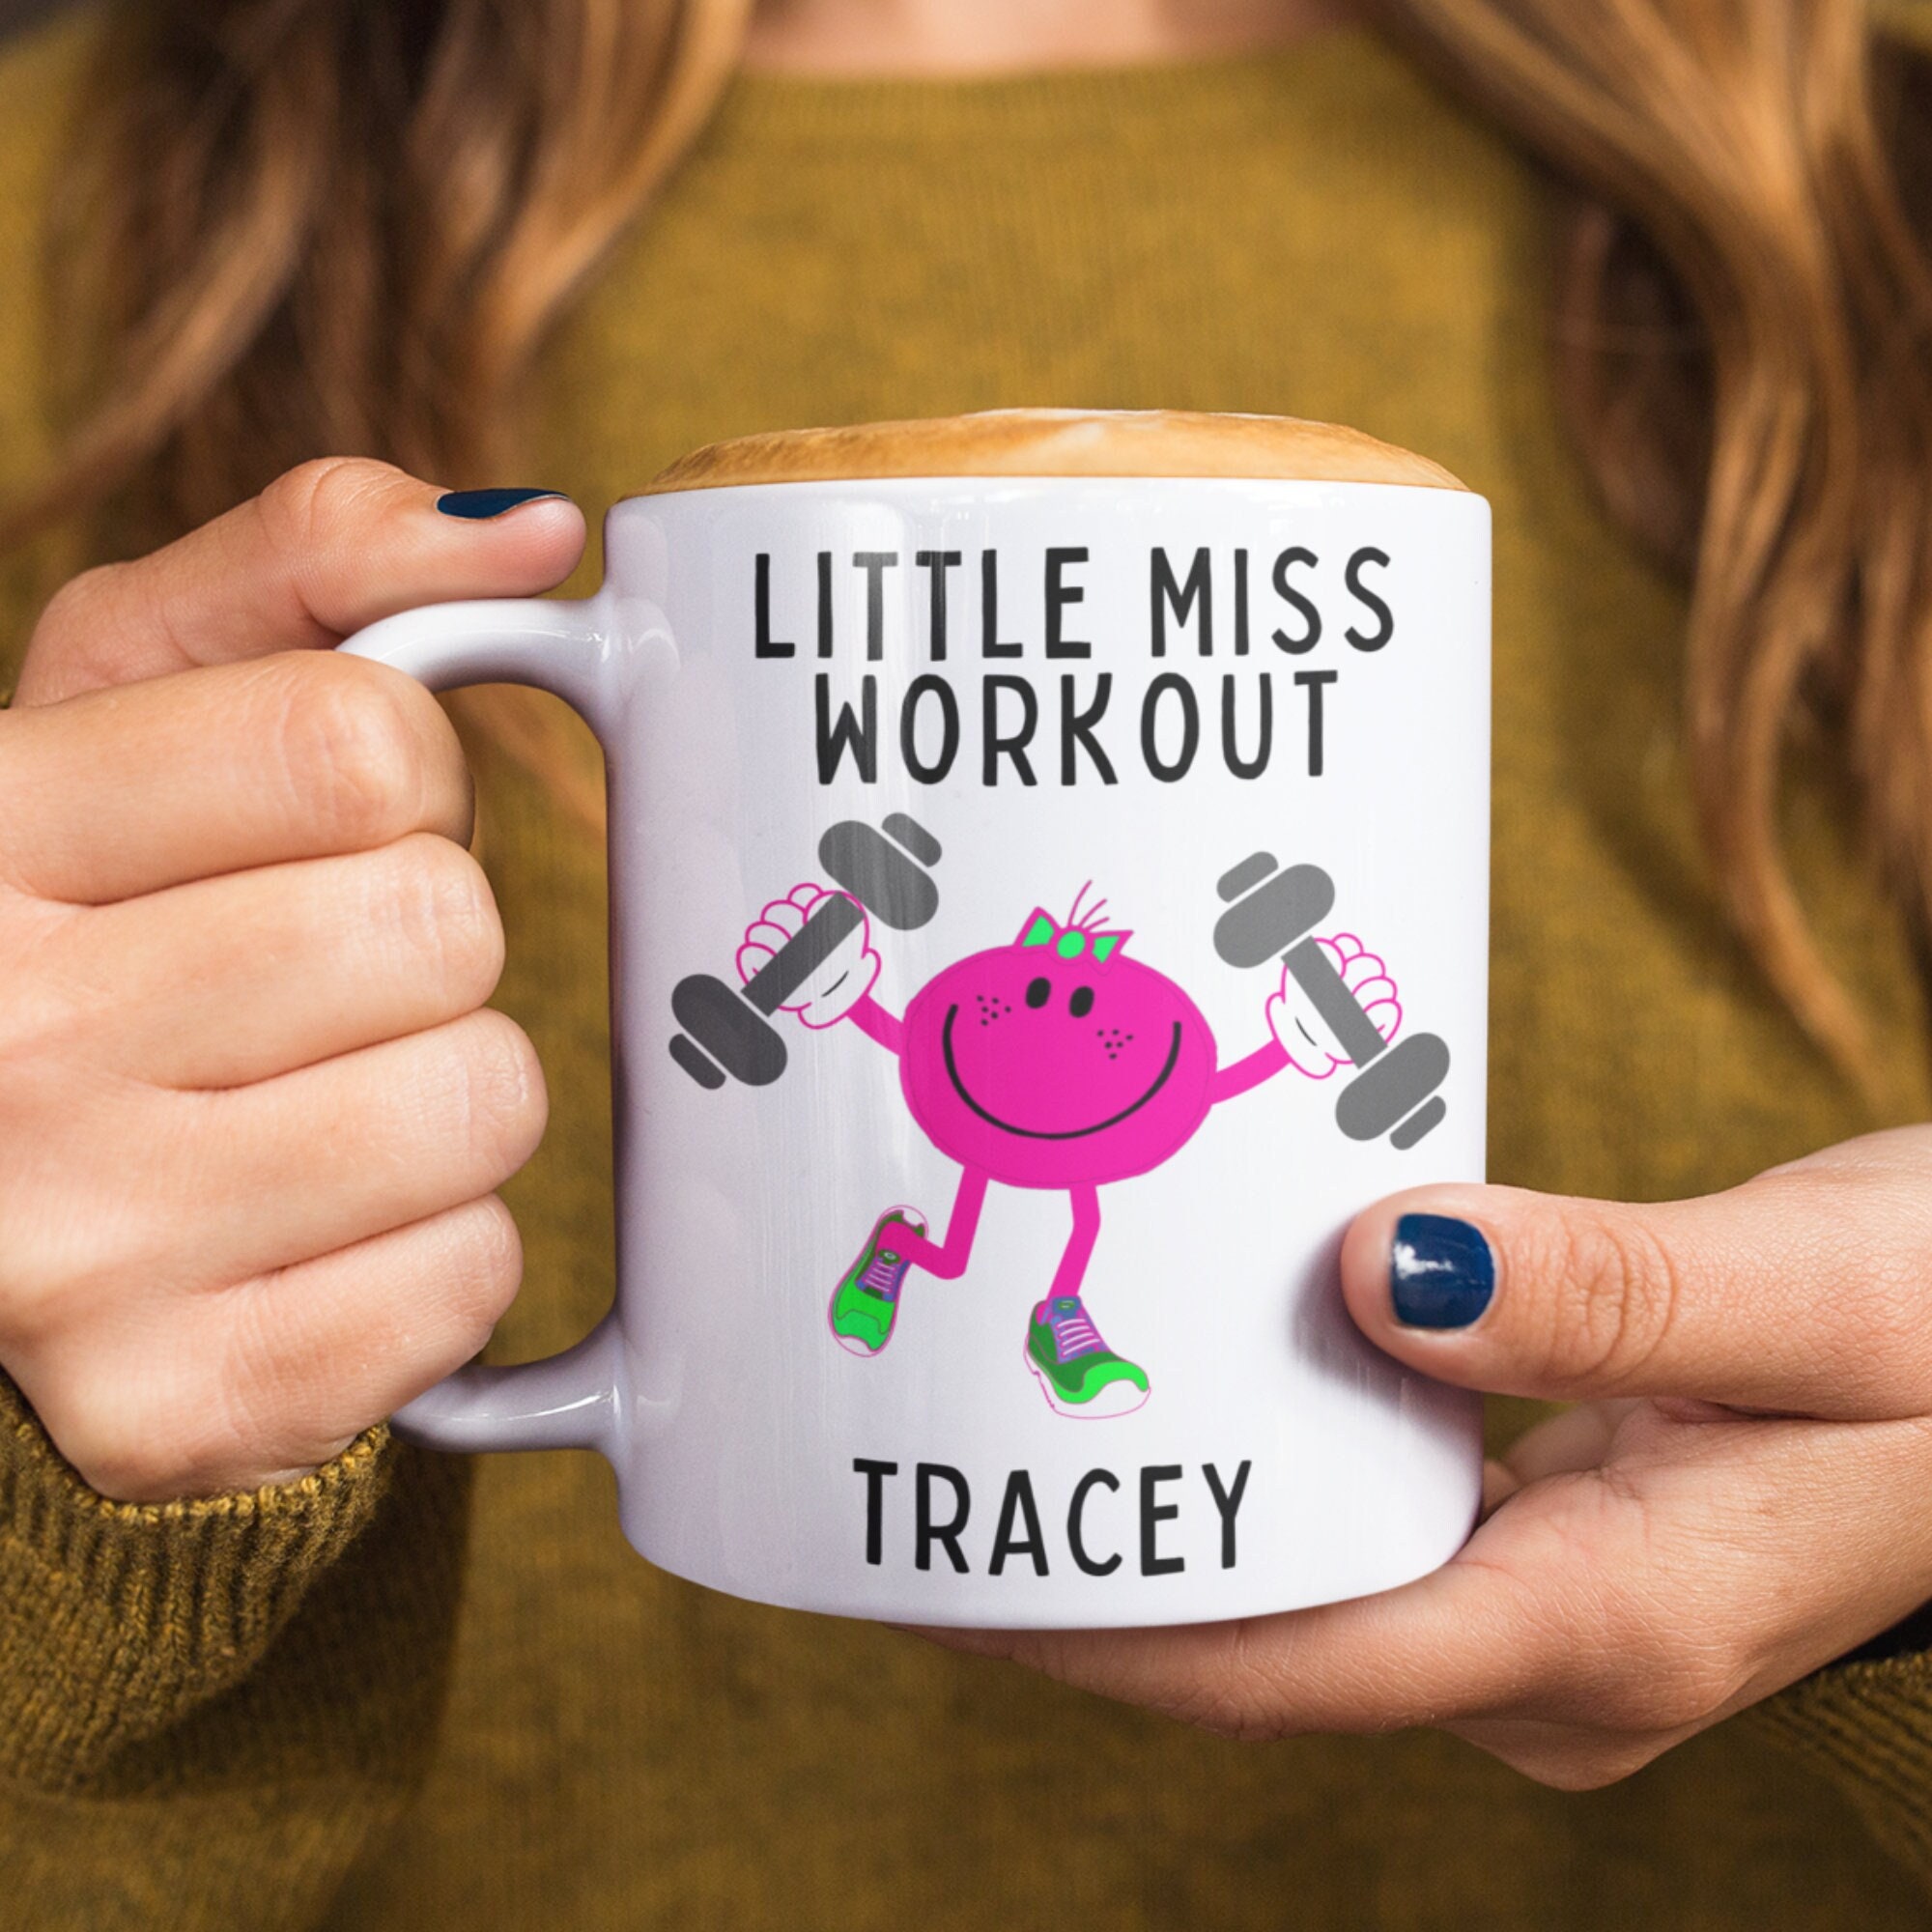 Casitika Fitness Mugs for Women and Men. I Love Burpees. 11 oz Workout  Coffee Mug. Funny Gym Work Out Cup for Exercise Lovers.